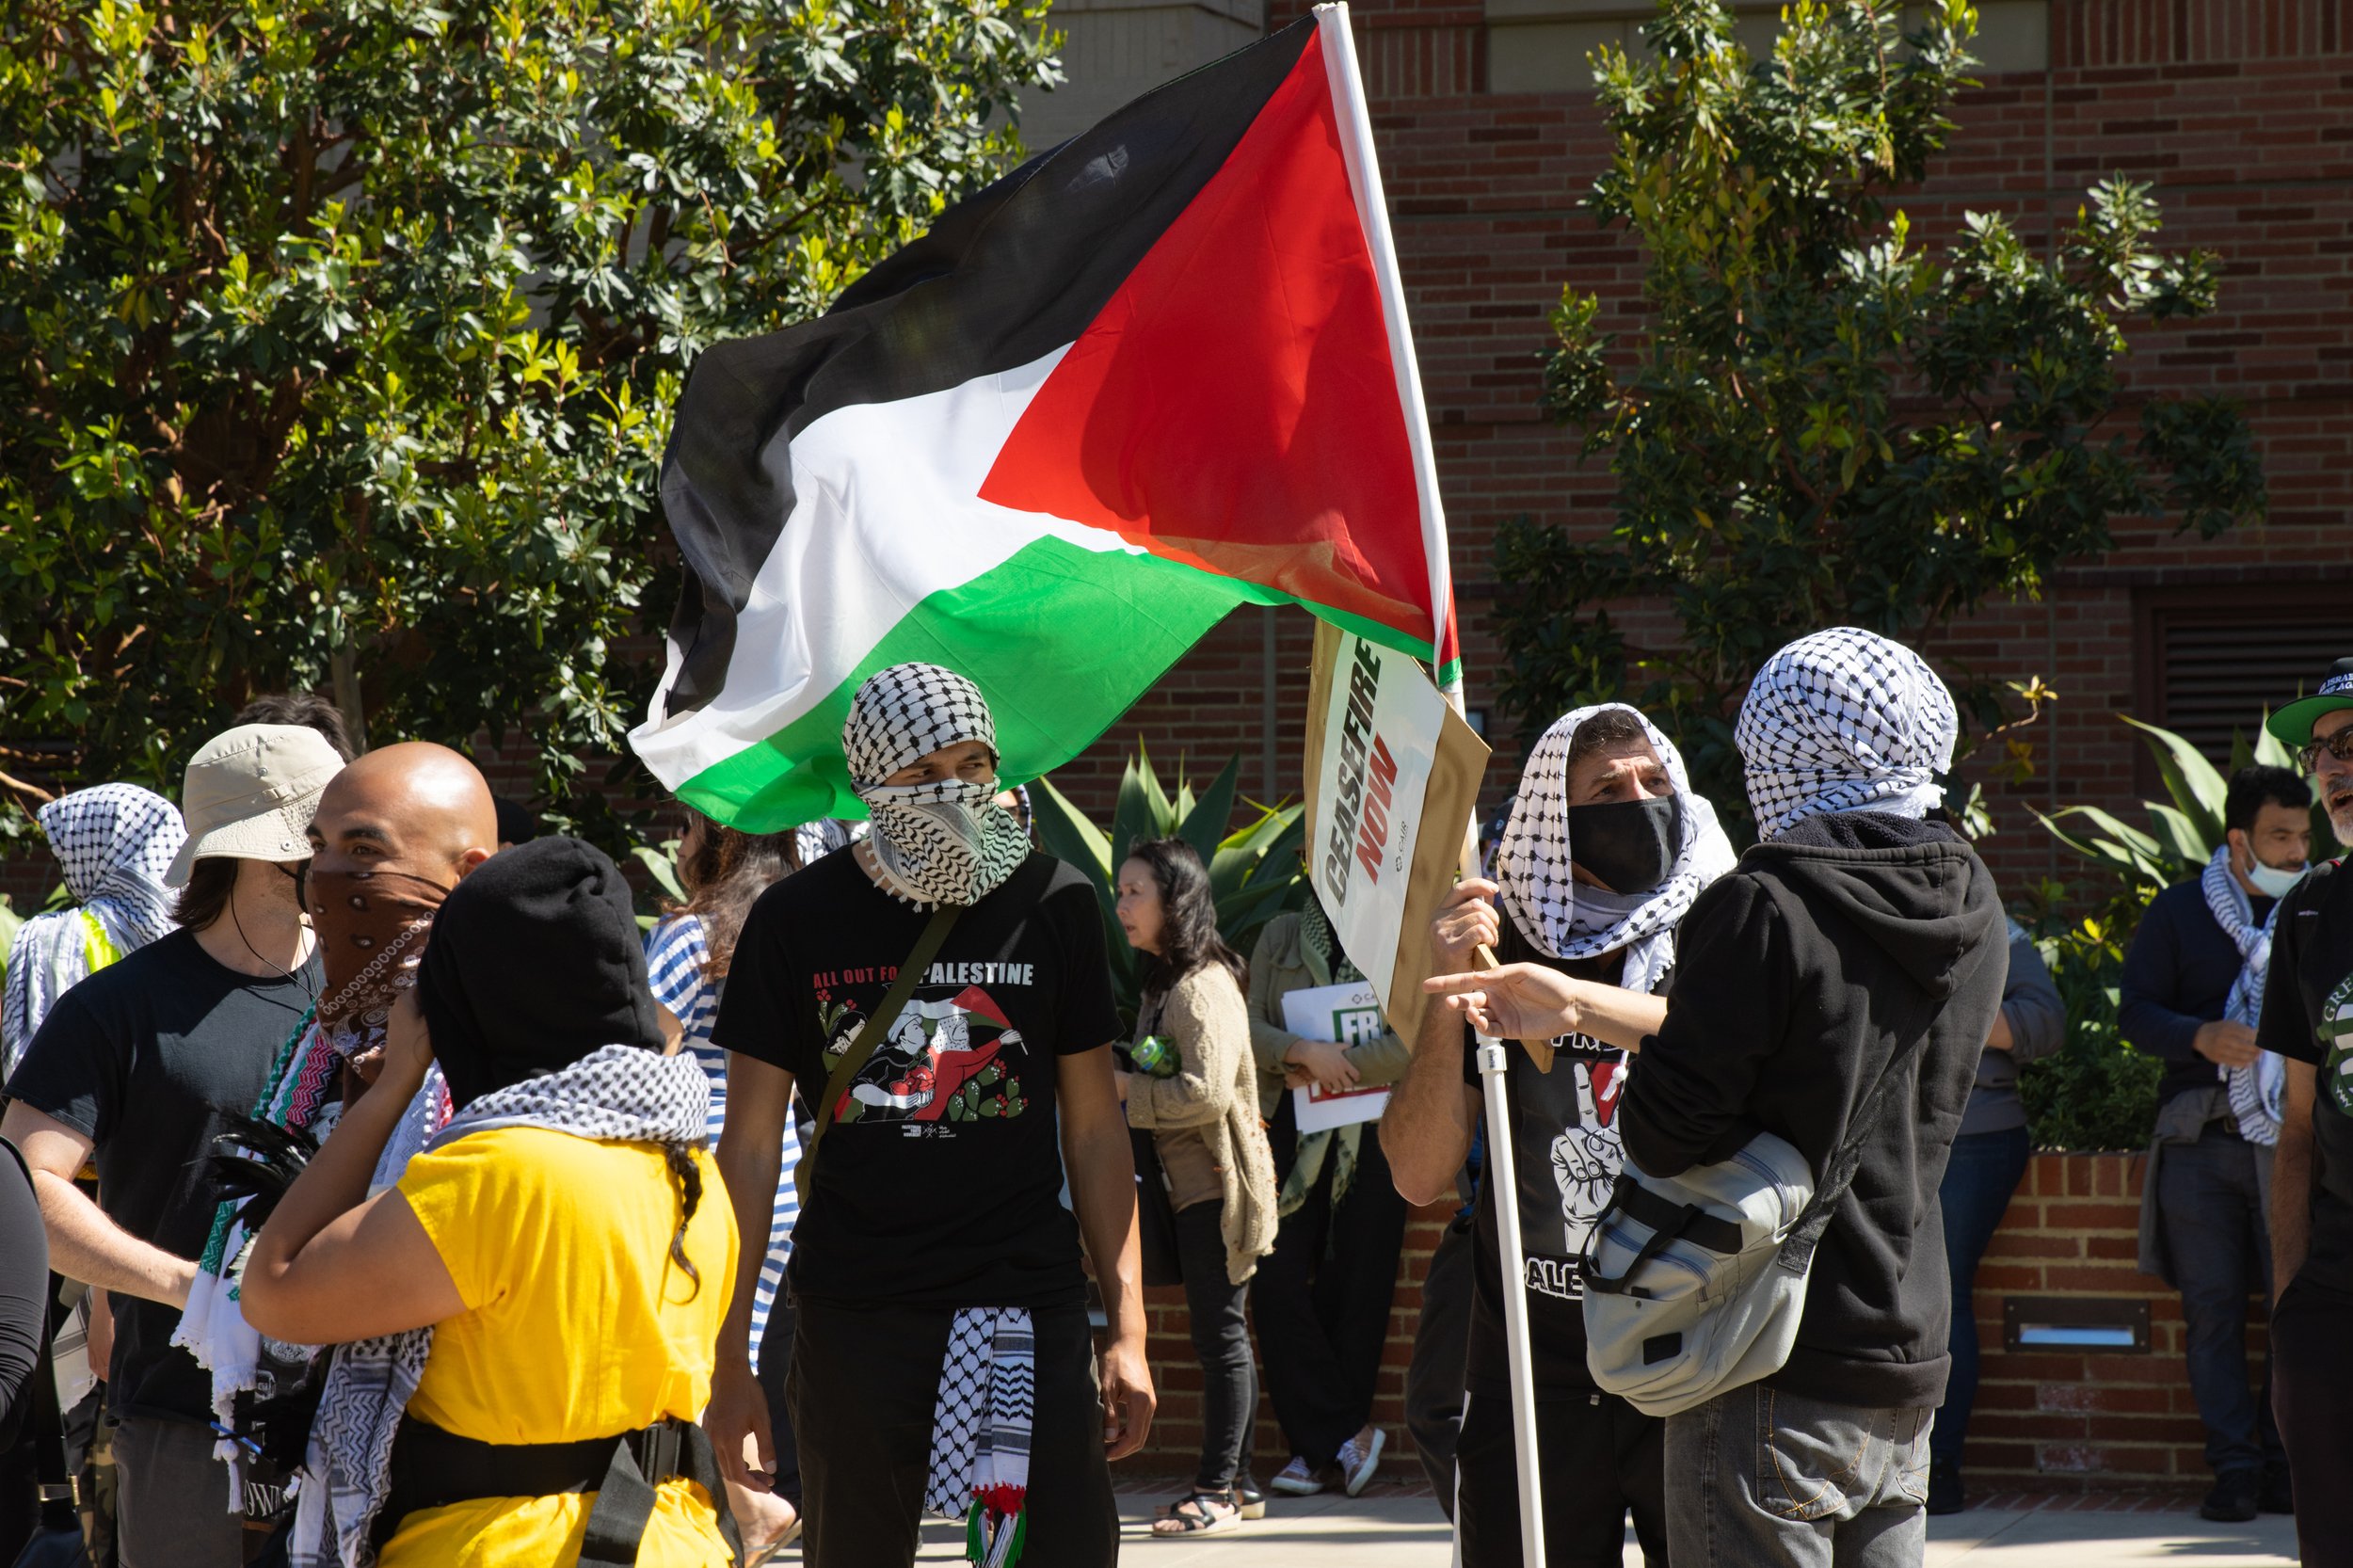  Protesters wave Palestinian flag and sign that reads "Cease Fire Now" at University of California, Los Angeles, Calif. Sunday, April 28, 2024 (Libna Florencio | The Corsair) 